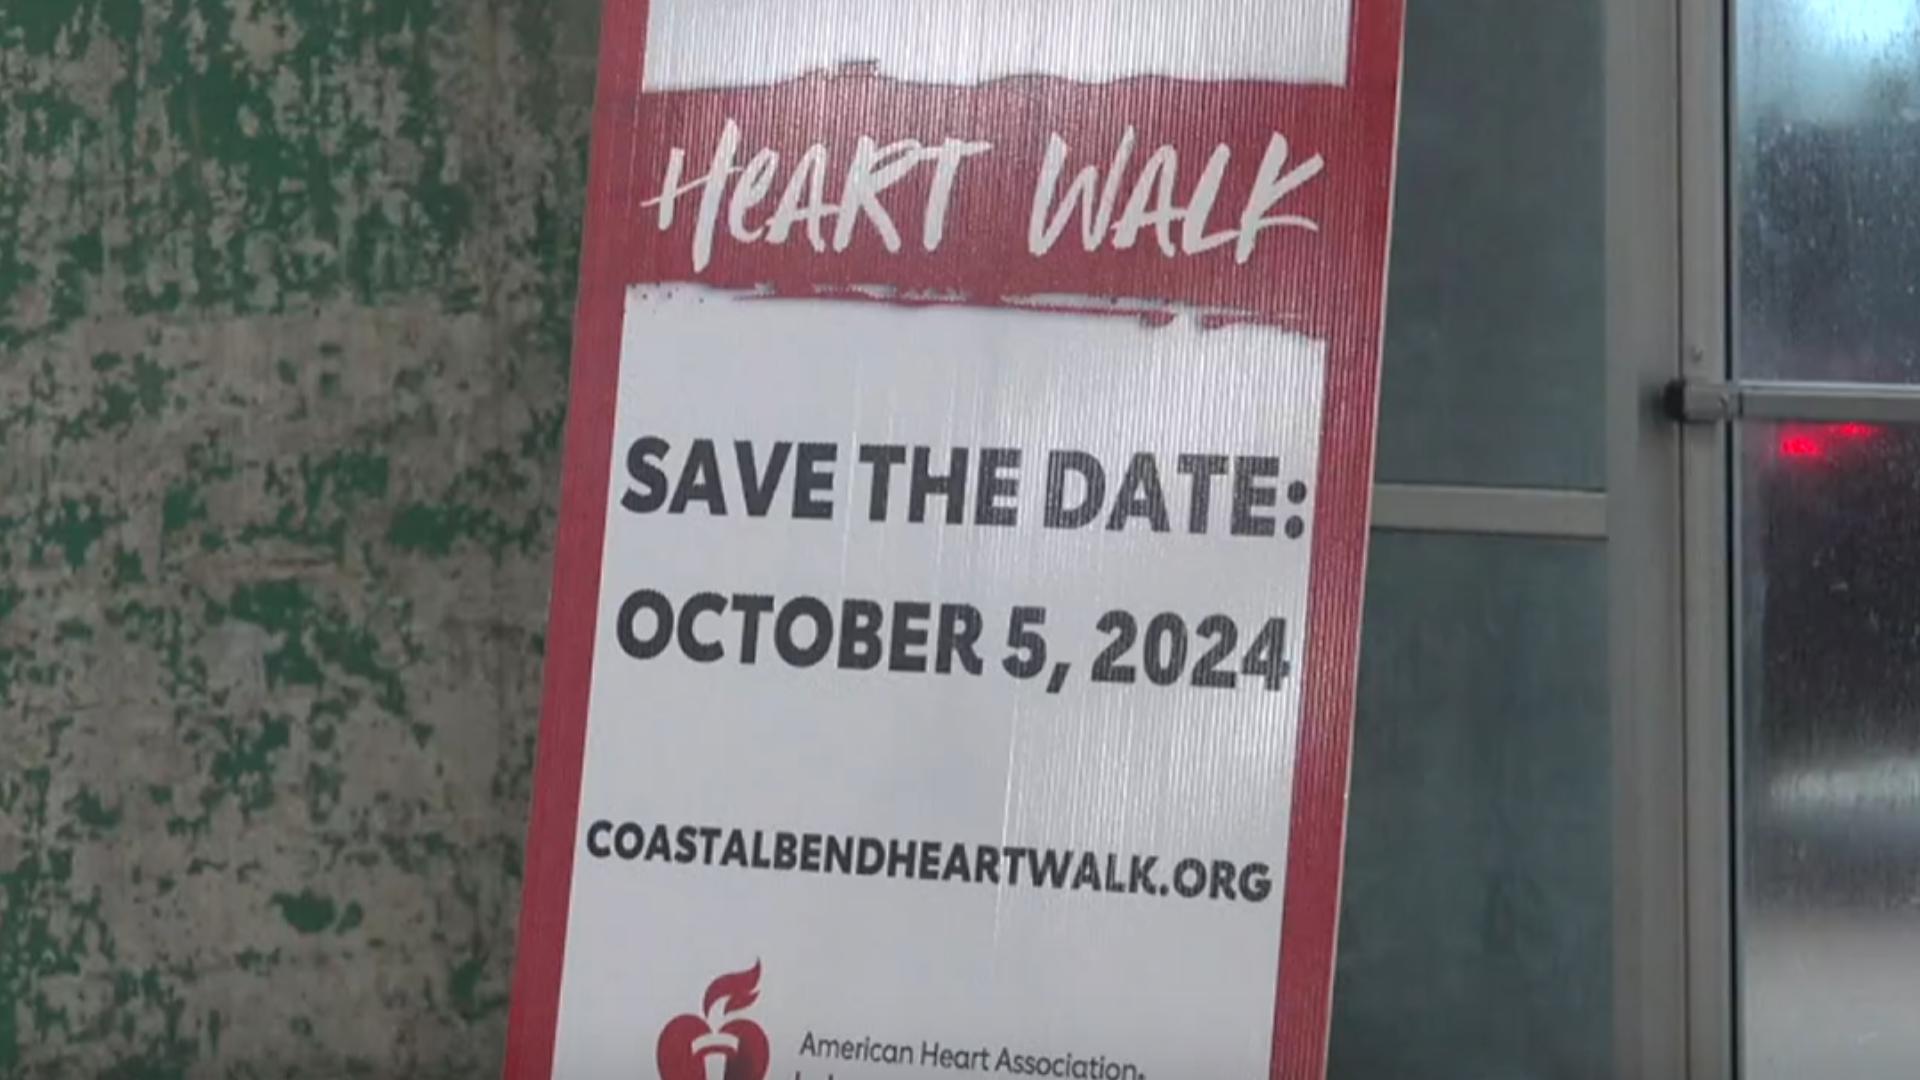 Save the date! This year's Heart Walk takes place on Saturday, October 5 at Whataburger Field!